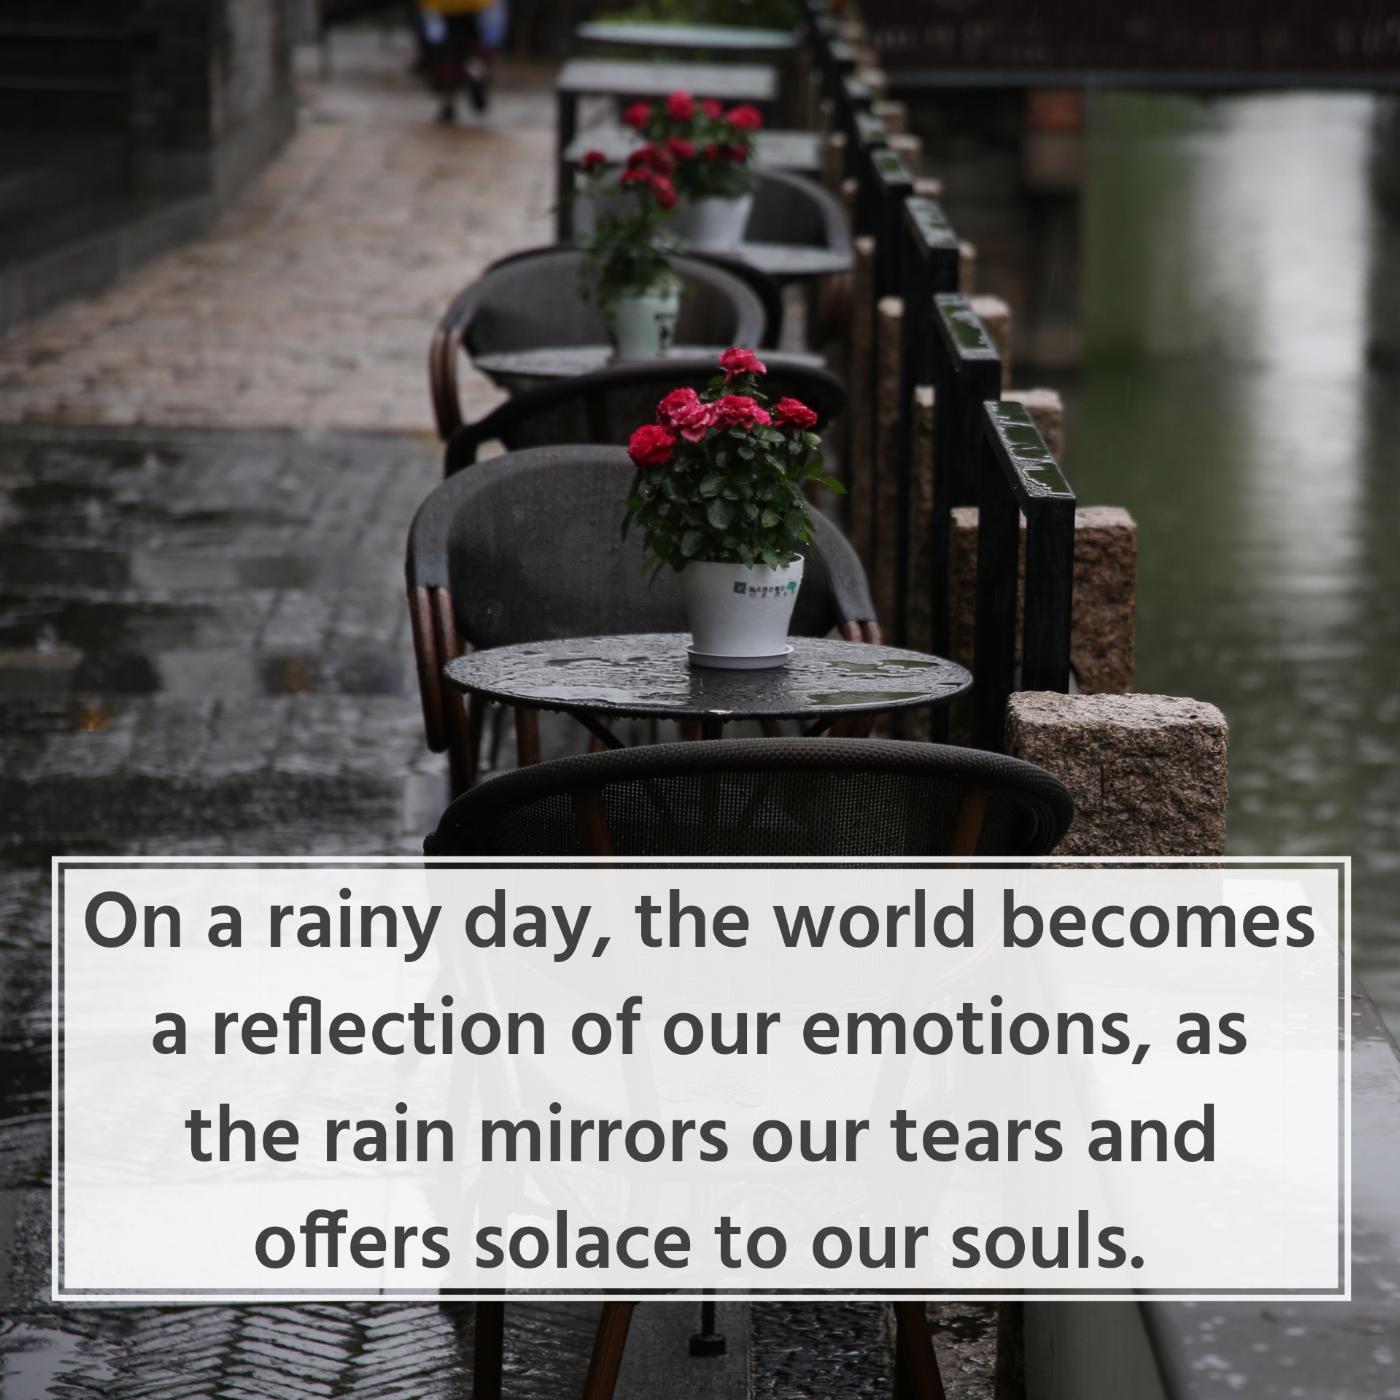 On a rainy day the world becomes a reflection of our emotions